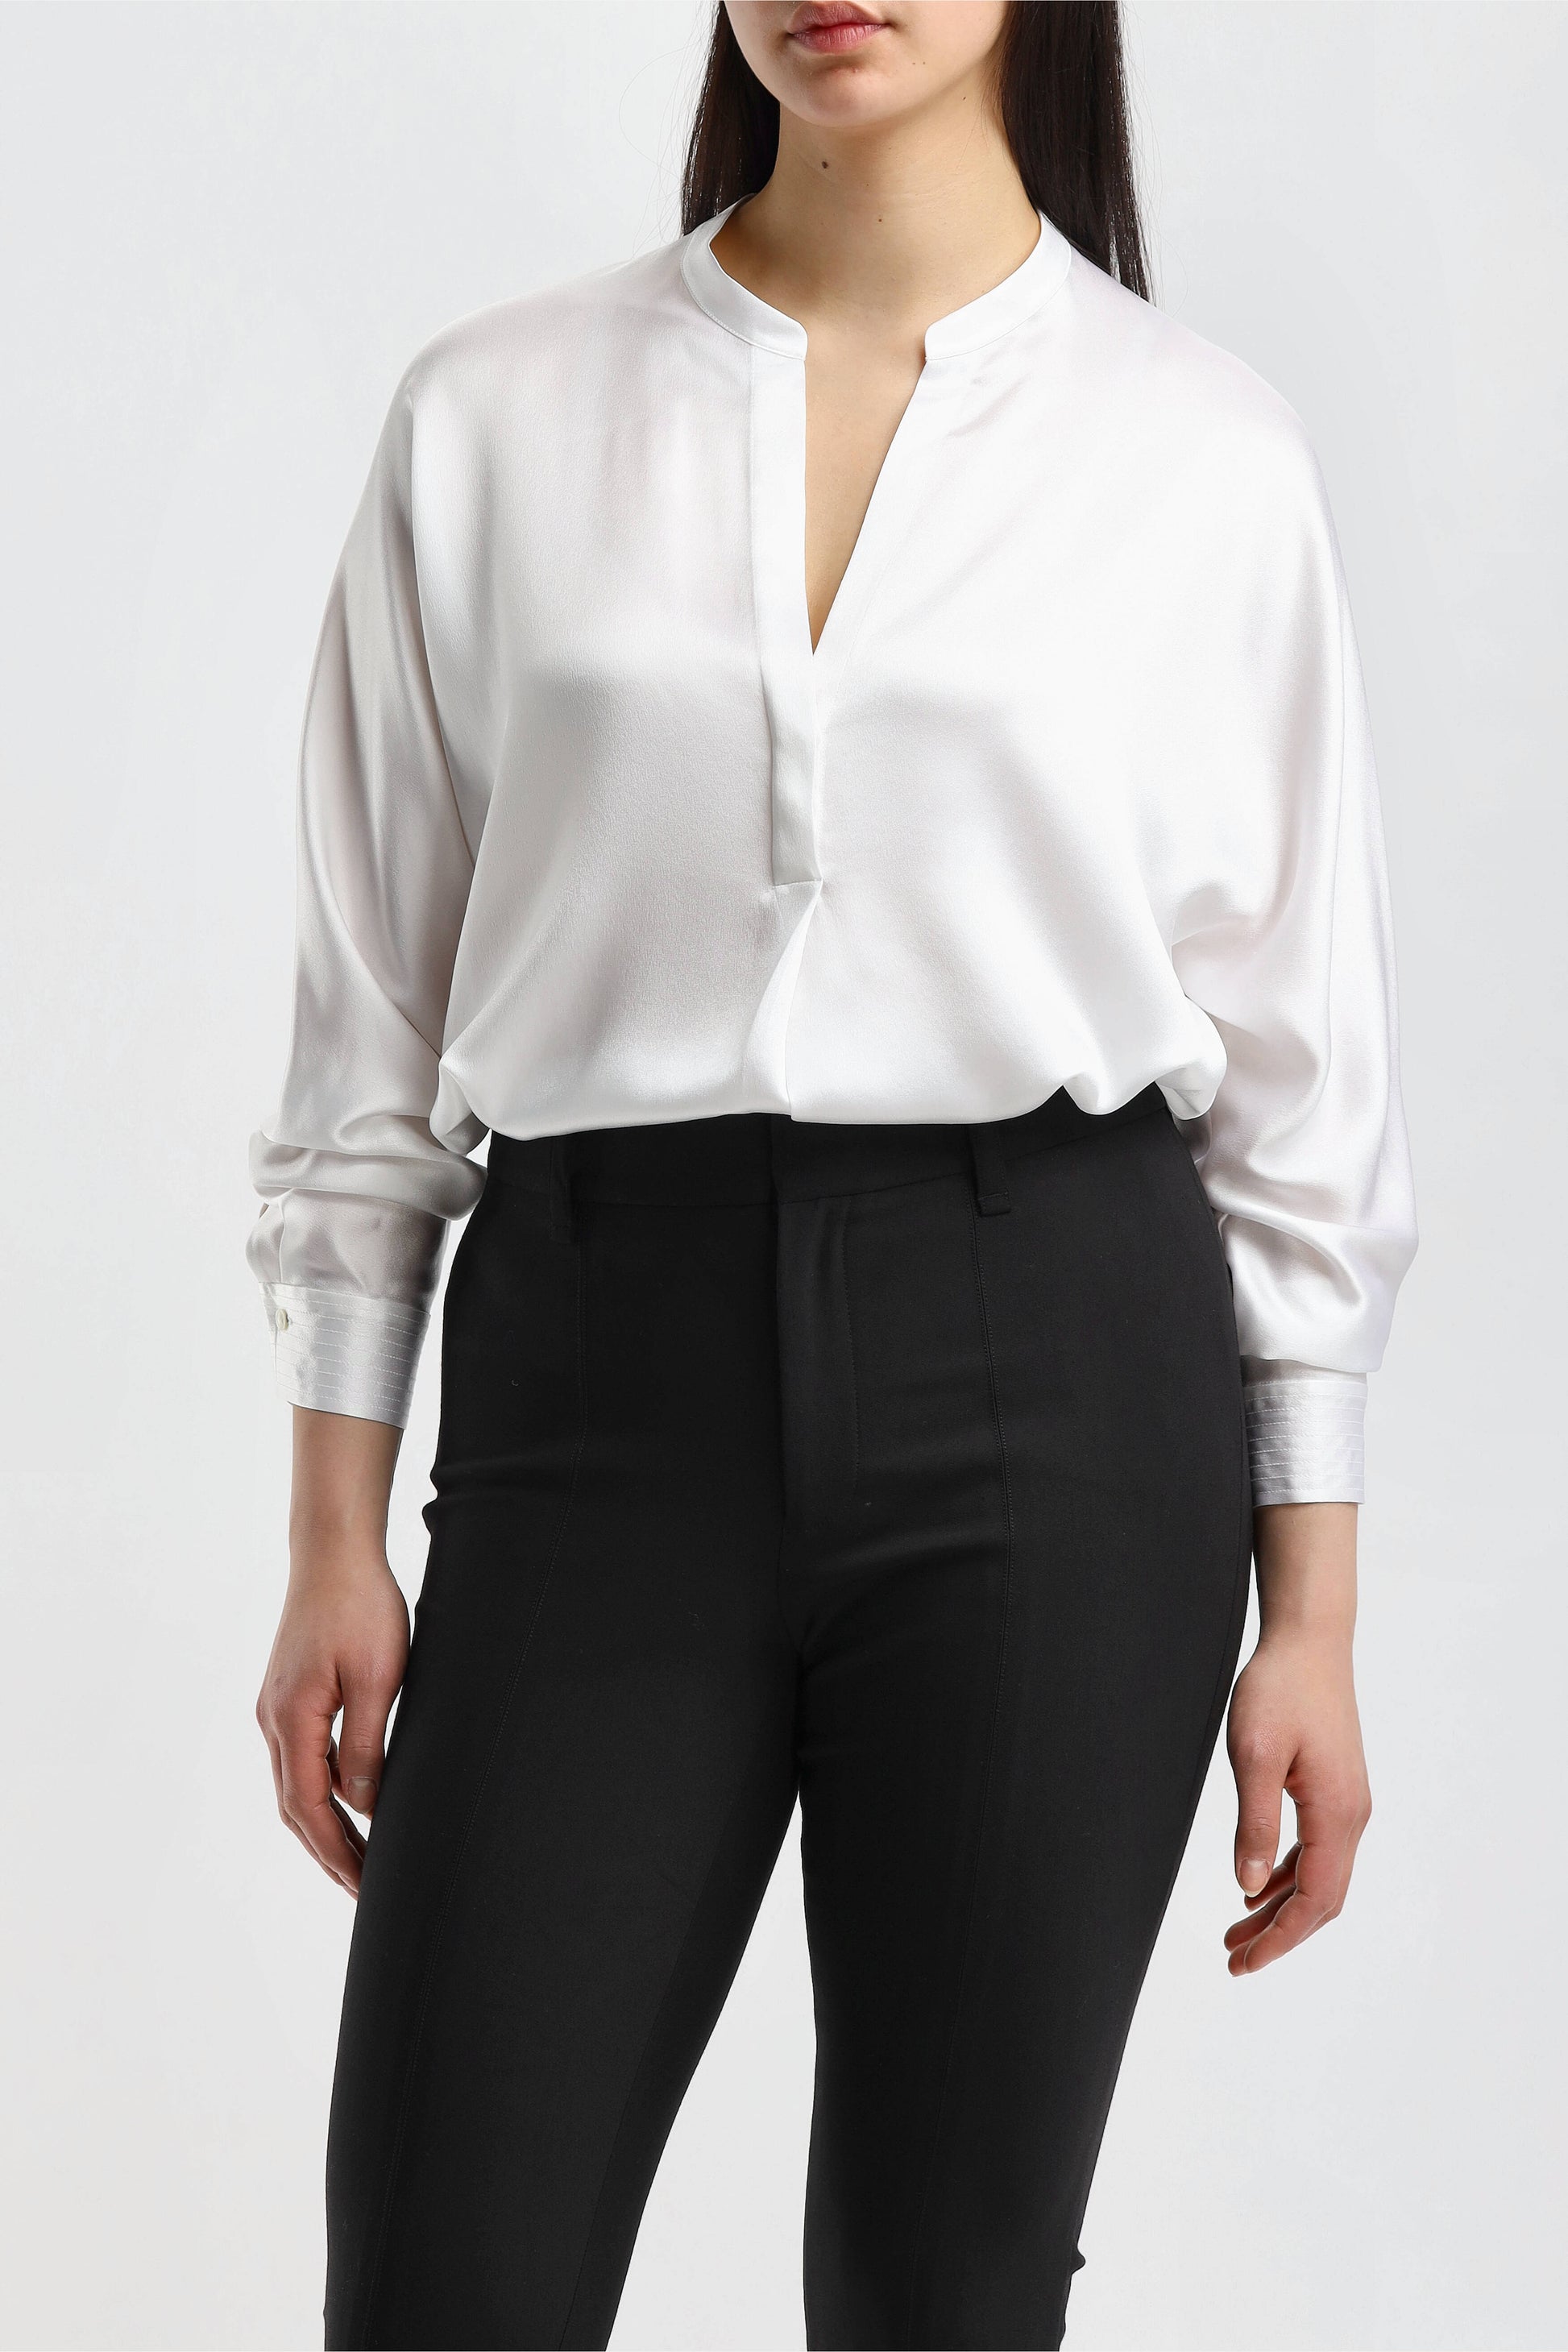 Seidenbluse Band Collar in Optic WhiteVince - Anita Hass